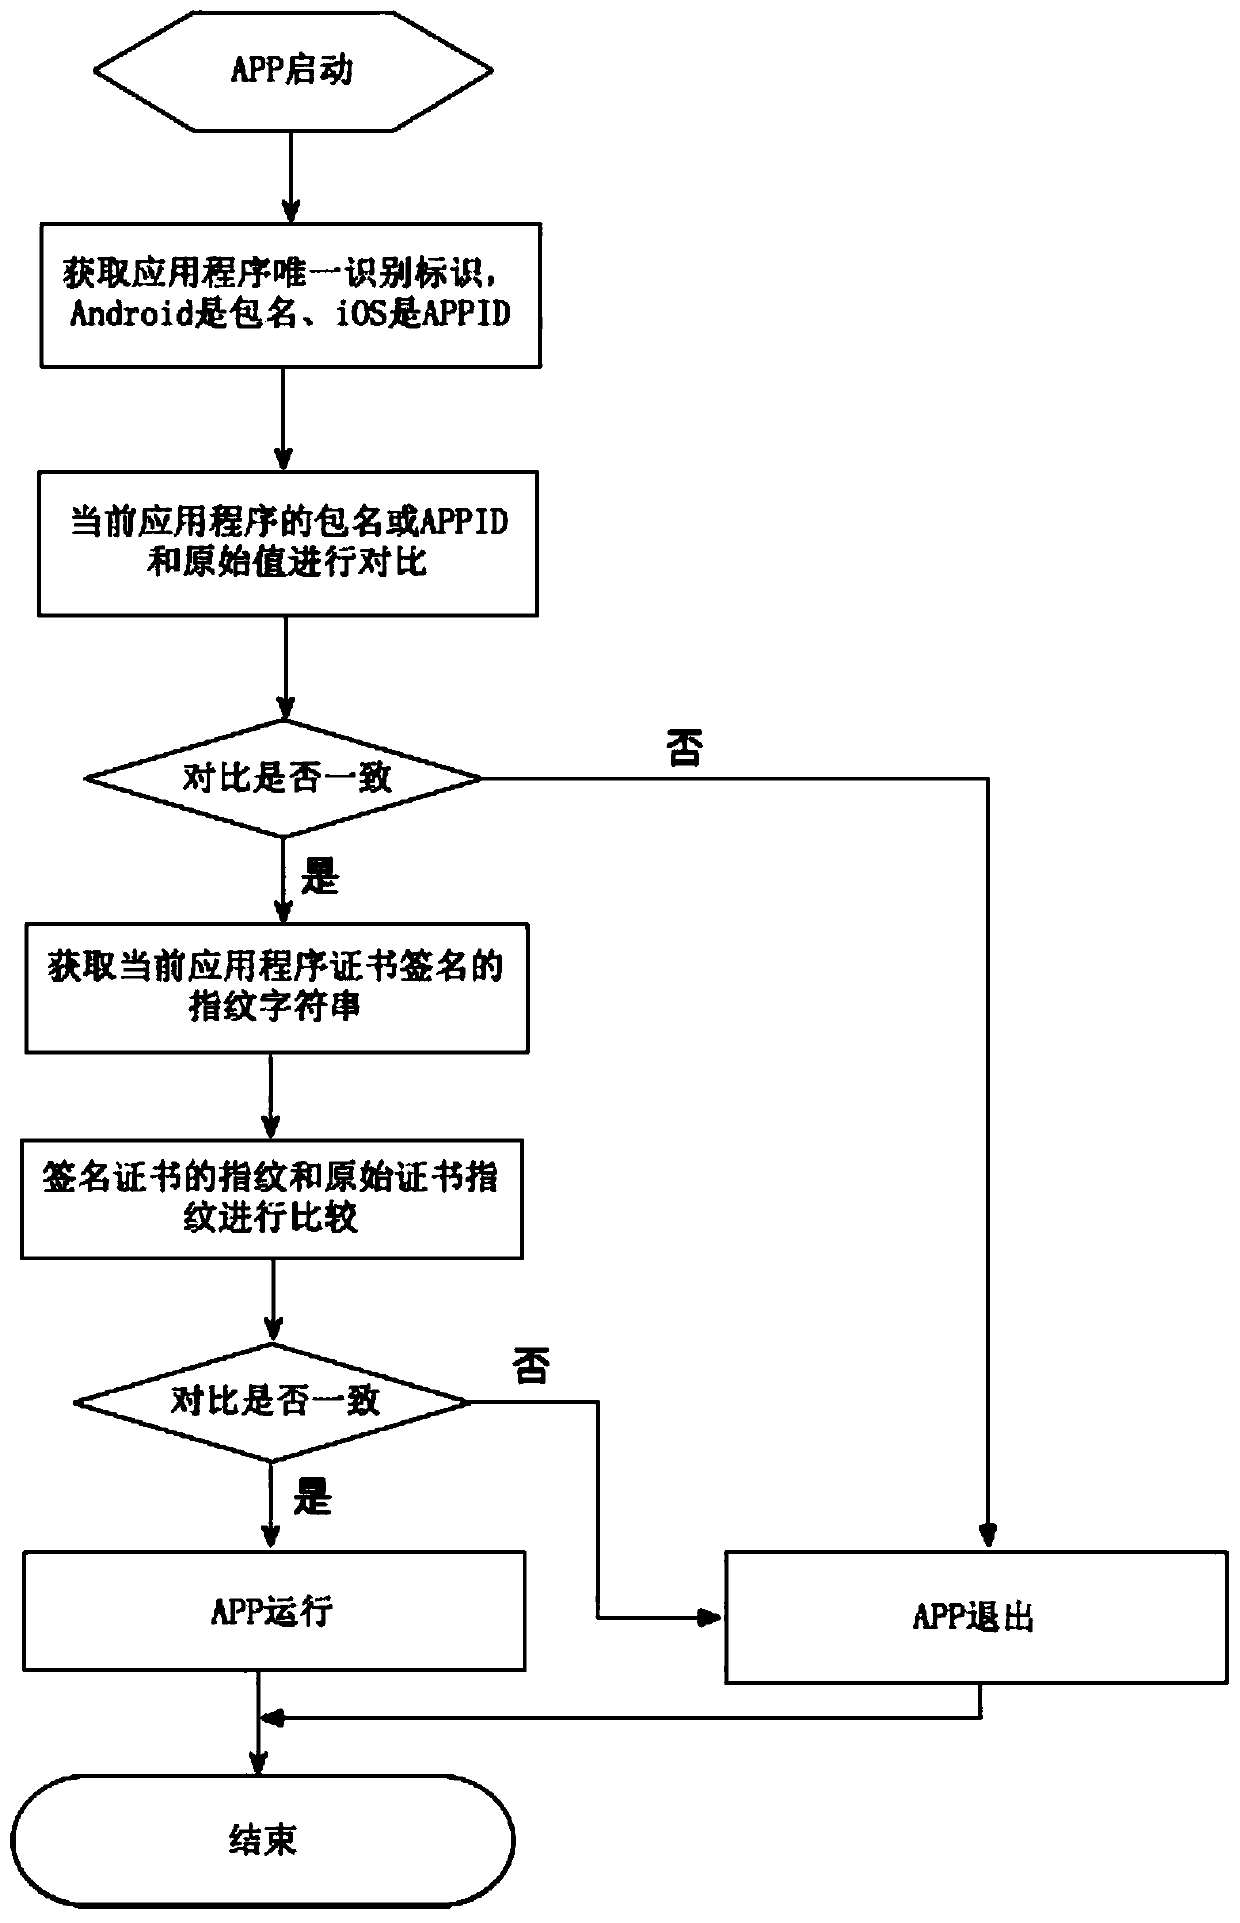 Method and system for preventing application program from being secondarily packaged